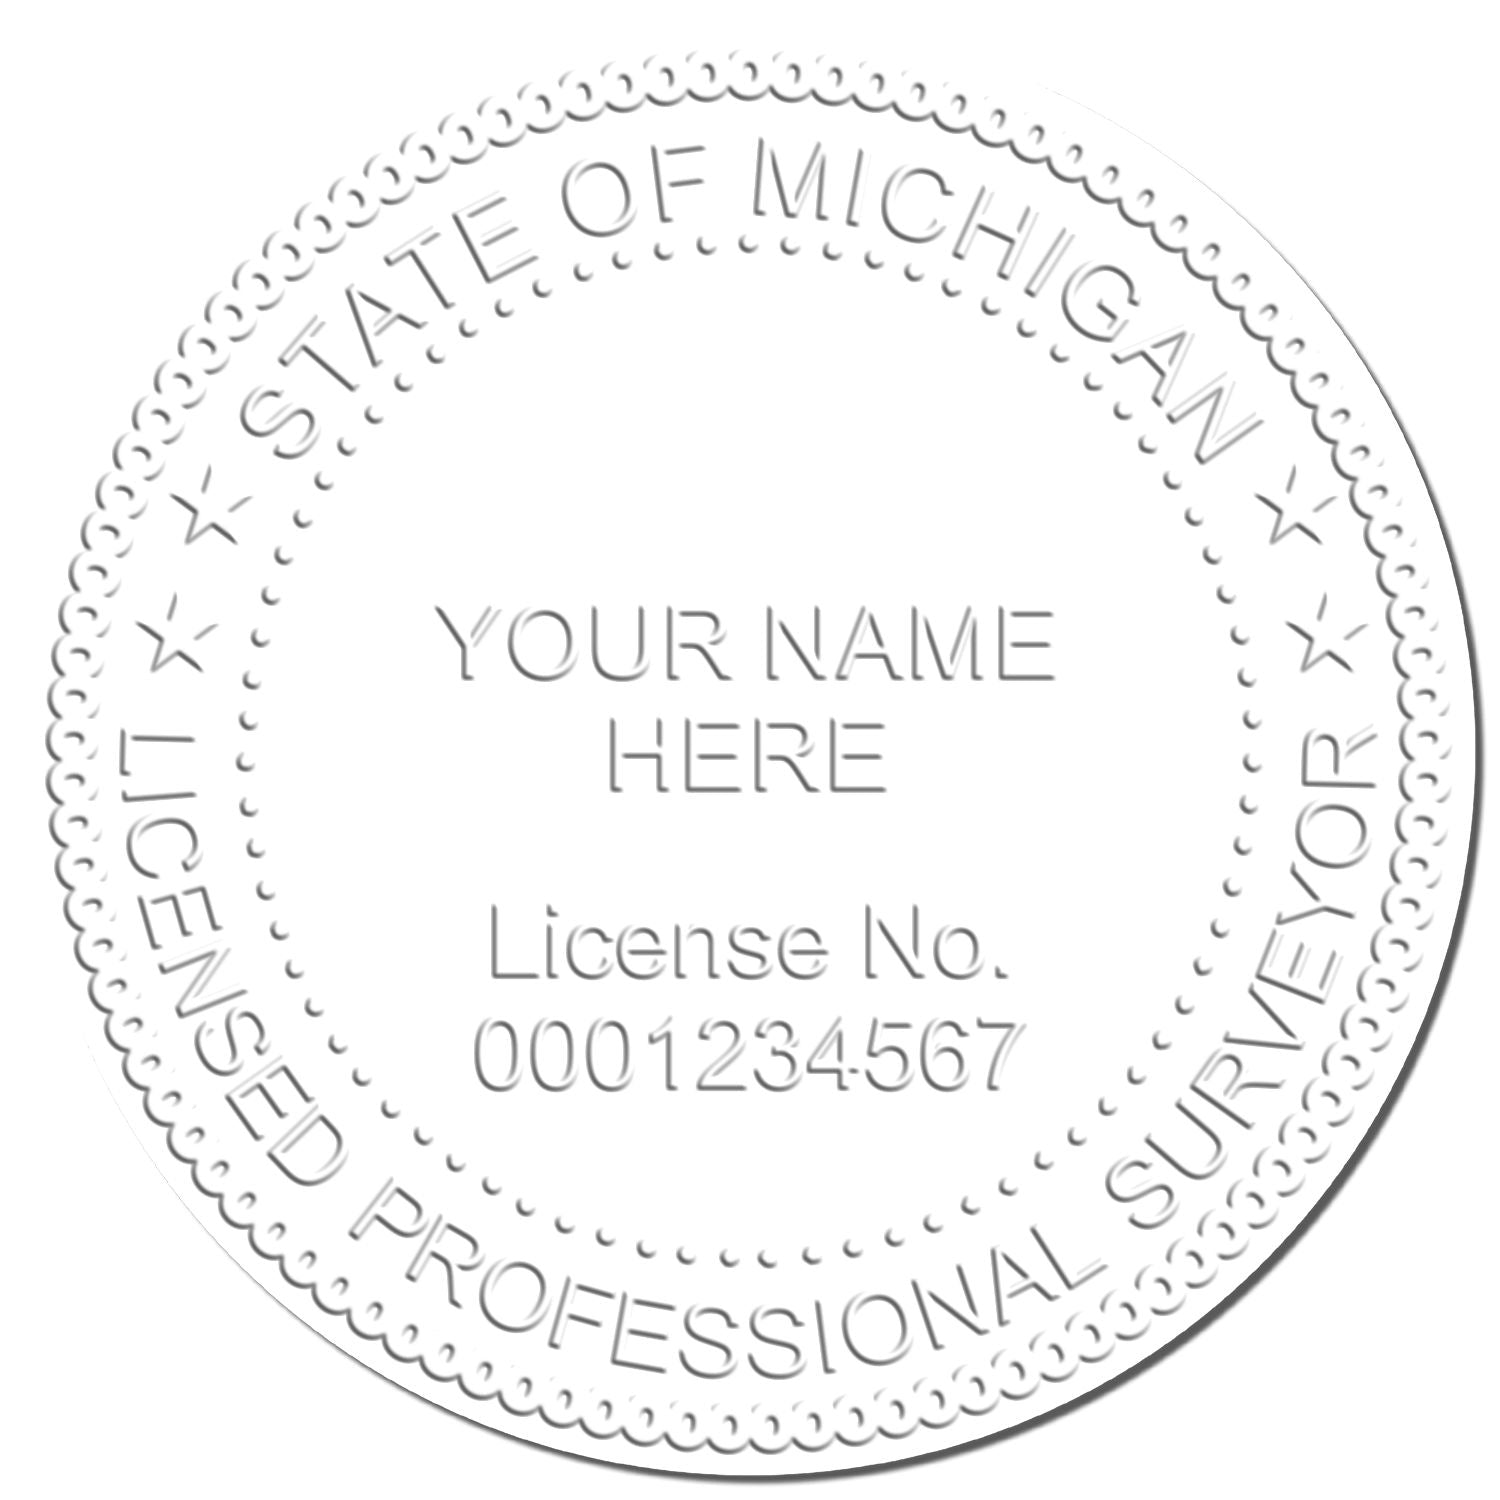 This paper is stamped with a sample imprint of the Hybrid Michigan Land Surveyor Seal, signifying its quality and reliability.